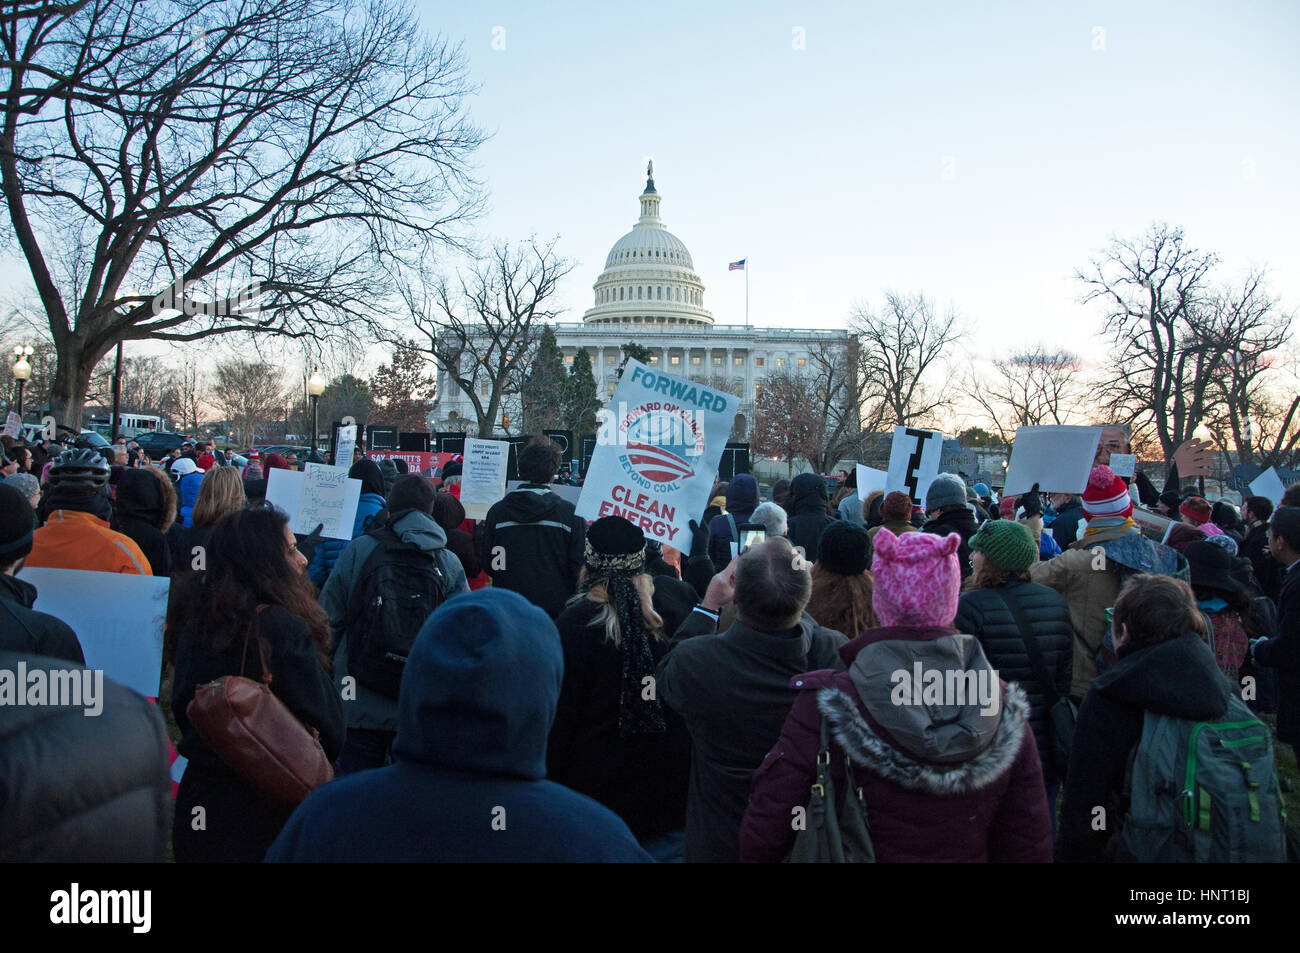 Washington DC, USA. 15th February, 2017. Demonstrators on Capitol Hill protest against the nomination of Scott Pruitt as Administrator of the Environmental Protection Agency. Kirk Treakle/Alamy Live News Stock Photo